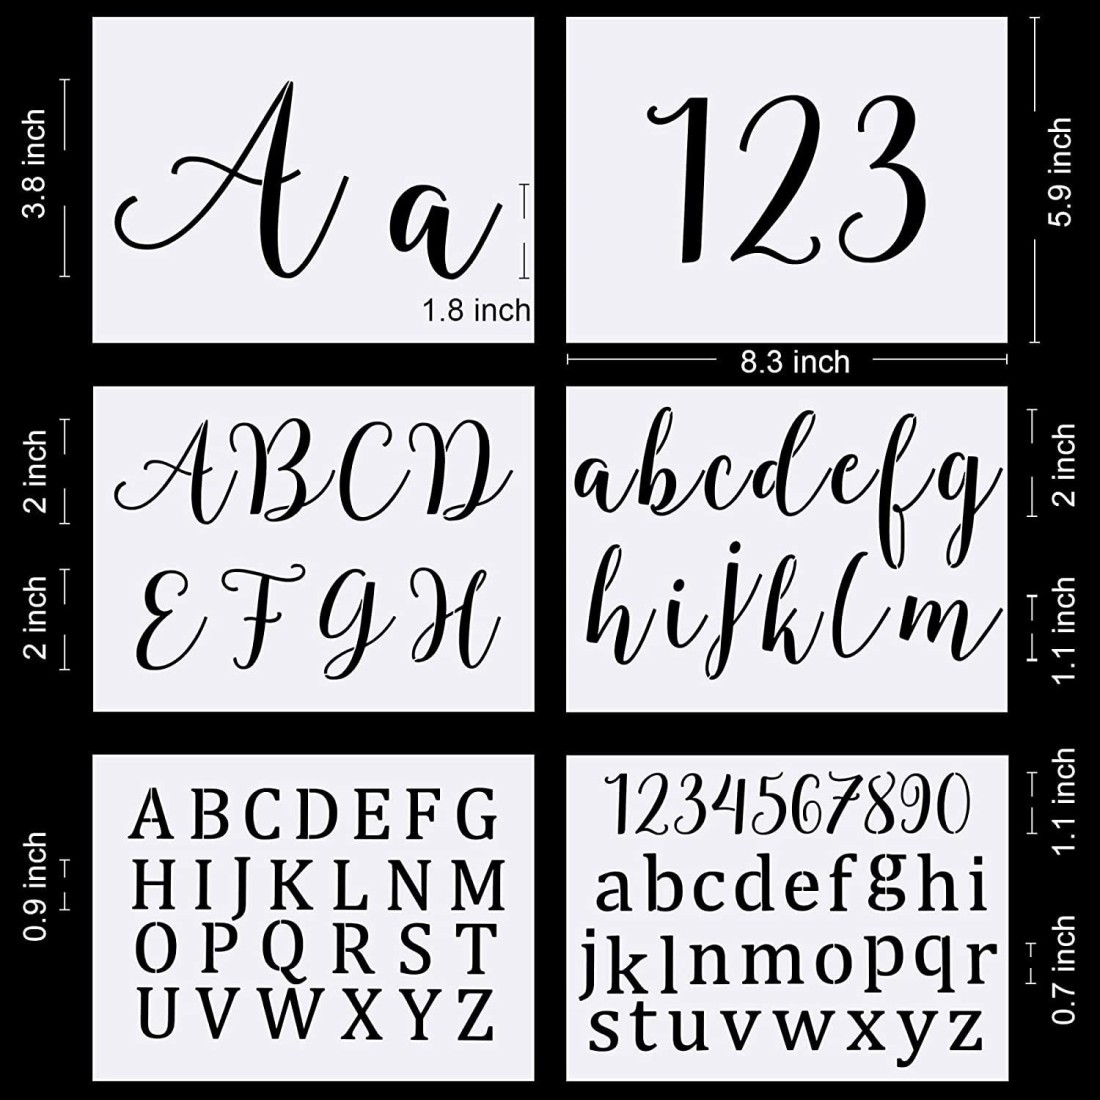 DEQUERA Letter Stencils for Painting on Wood - Alphabet Stencils  Calligraphy Font Upper and Lowercase Cursive Stencil Letters Templates  Reusable Plastic Art DIY Craft w ith Numbers Signs Set of 40 Pieces